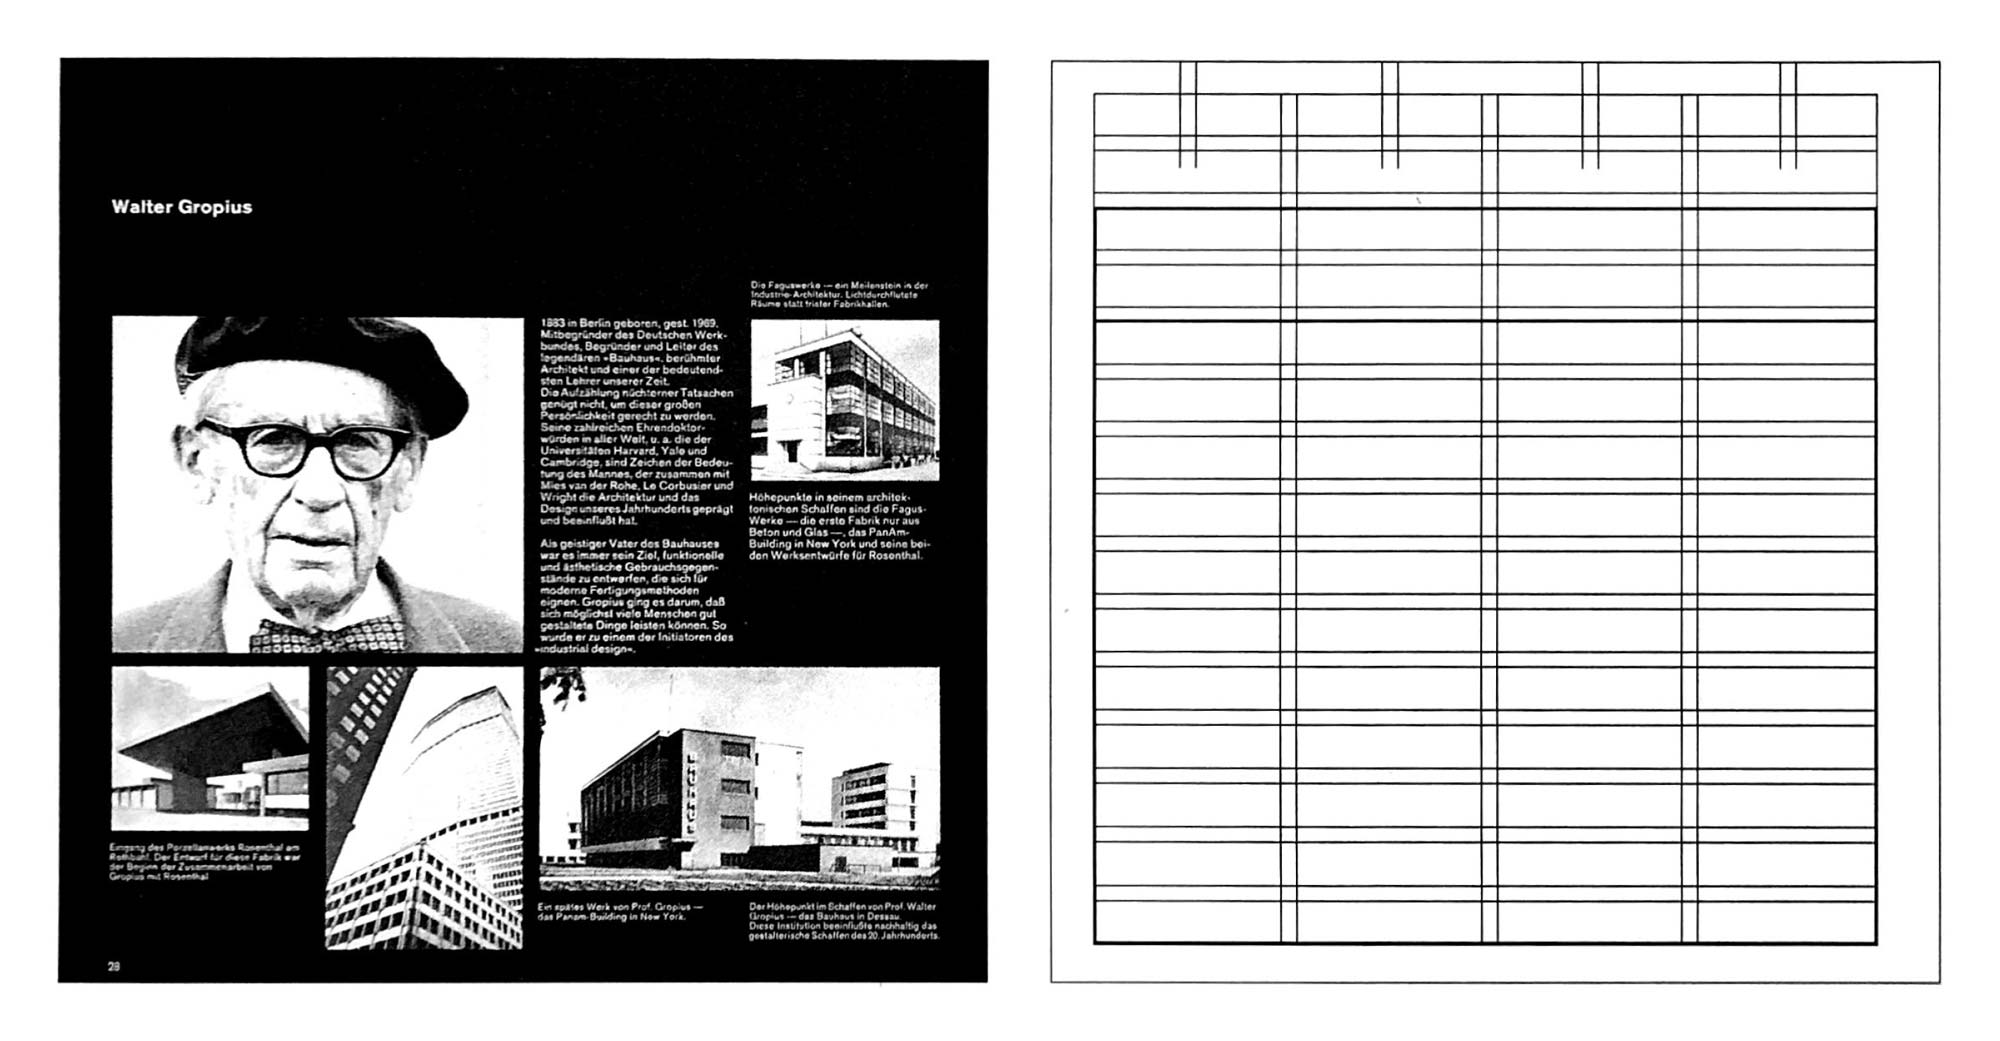 Sample page from the catalog showing the use of the 4 column, 15 row grid to layout an arrangement of images and text.